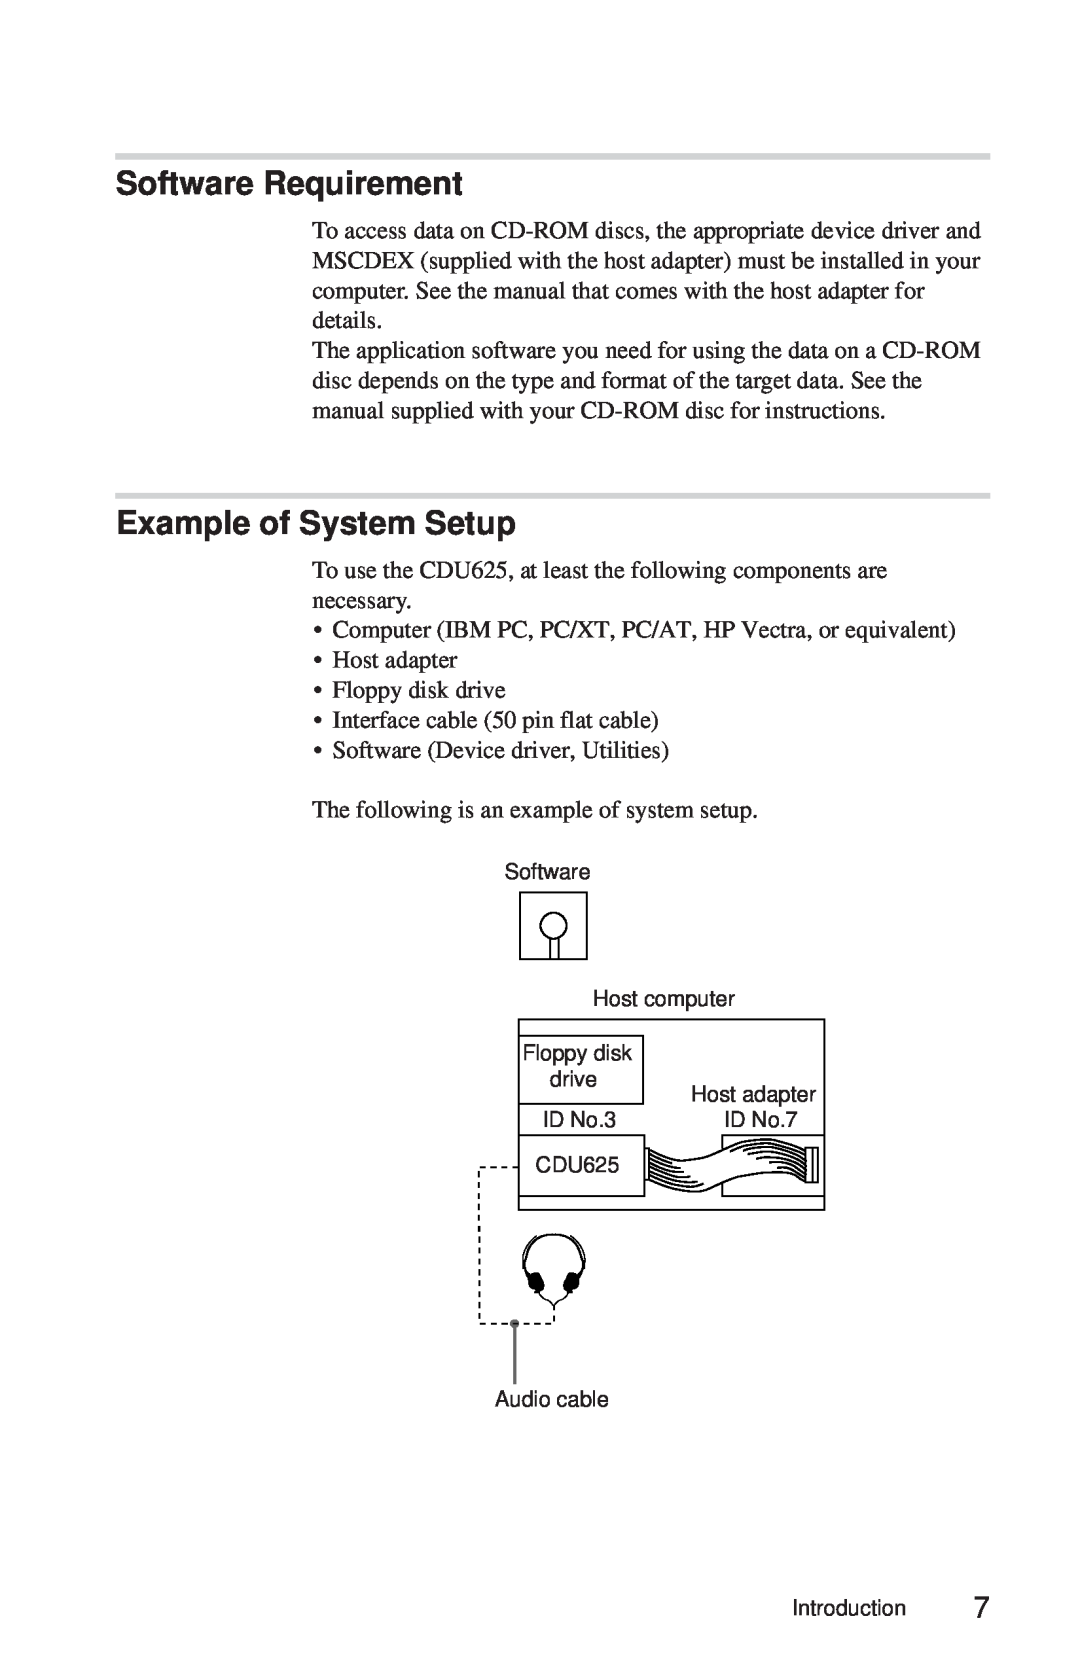 Sony CDU625 manual Software Requirement, Example of System Setup 